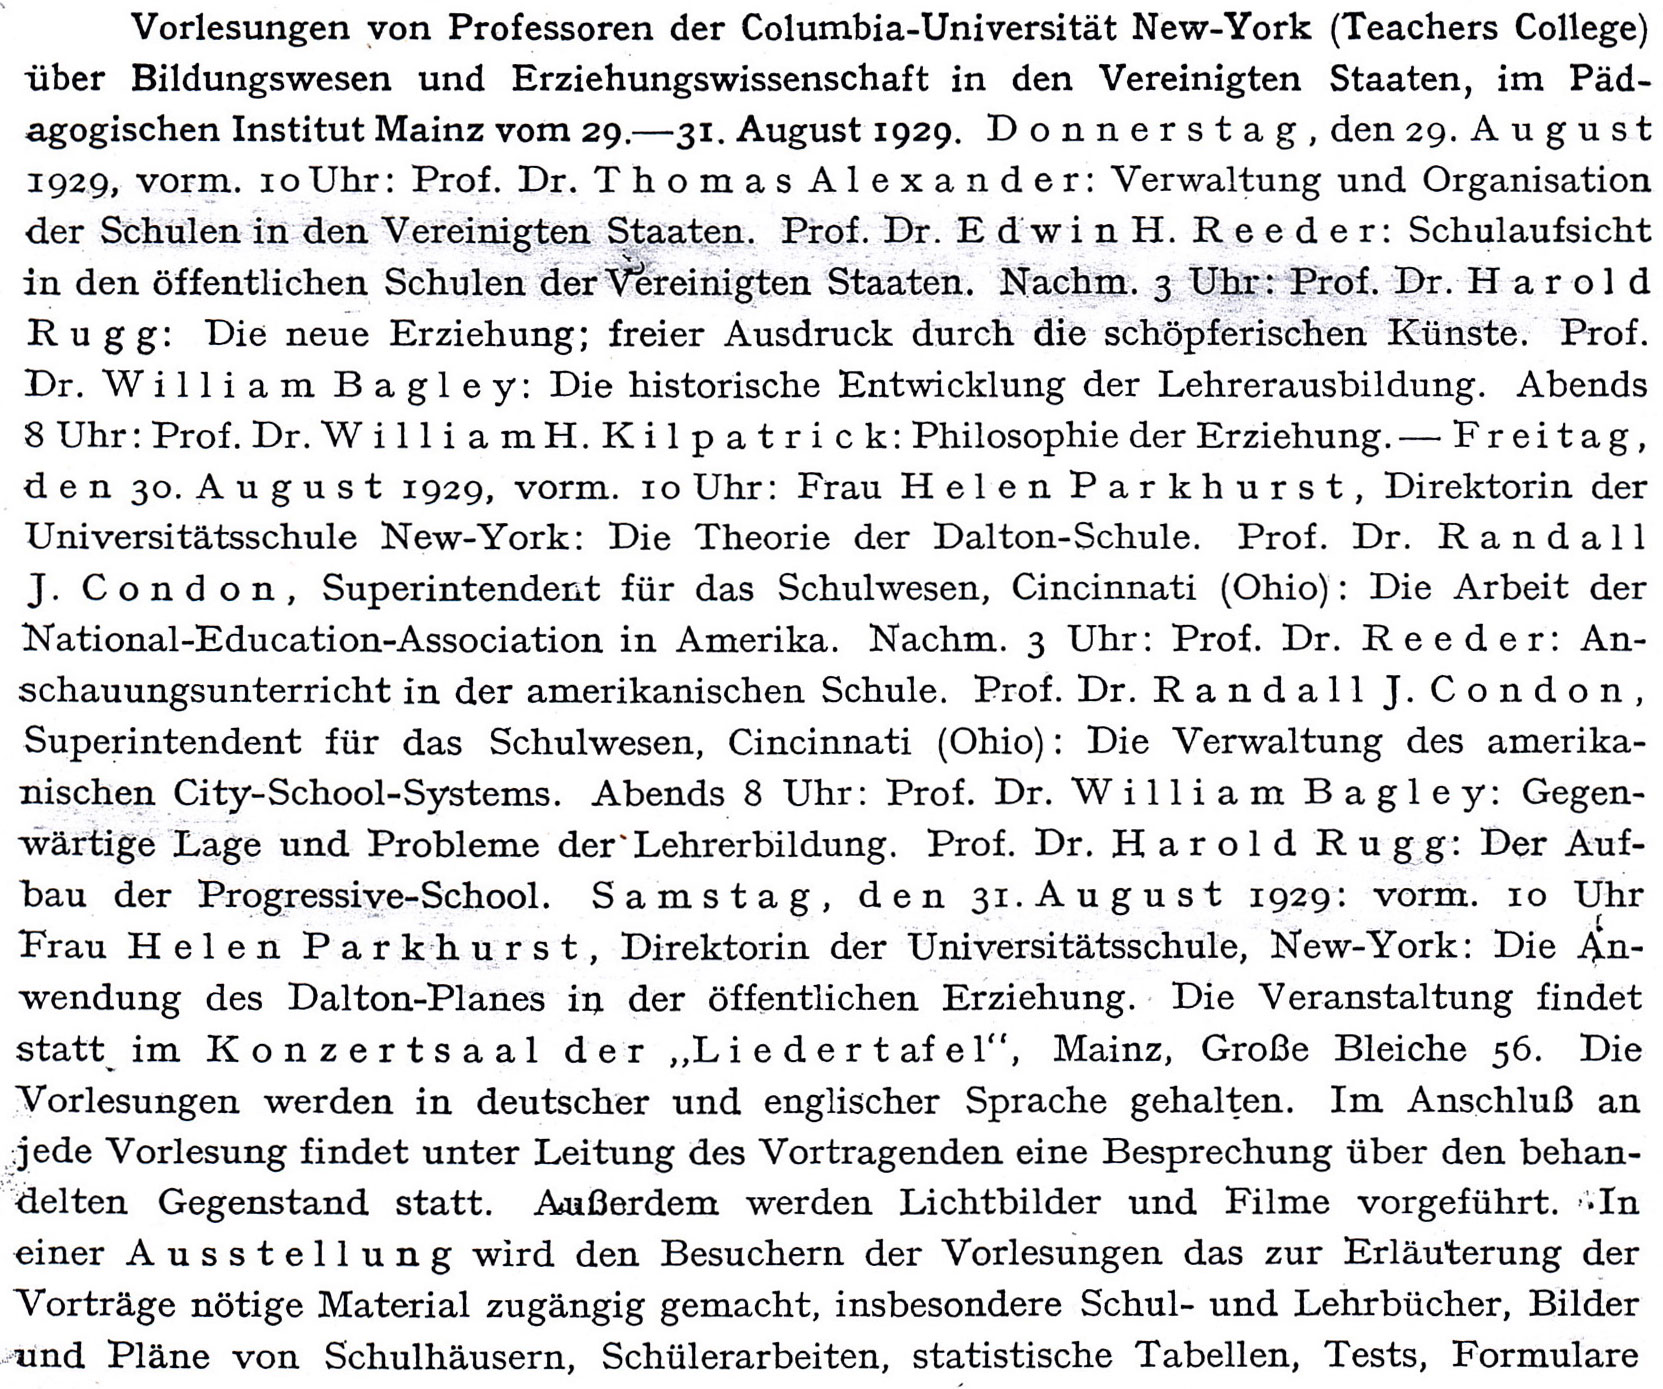 Figure 5: Announcement of the lectures by professors from Teachers College N.Y. and school professionals from the USA at the Pedagogical Institute in Mainz, 1929 (PZ, 1929, 466)